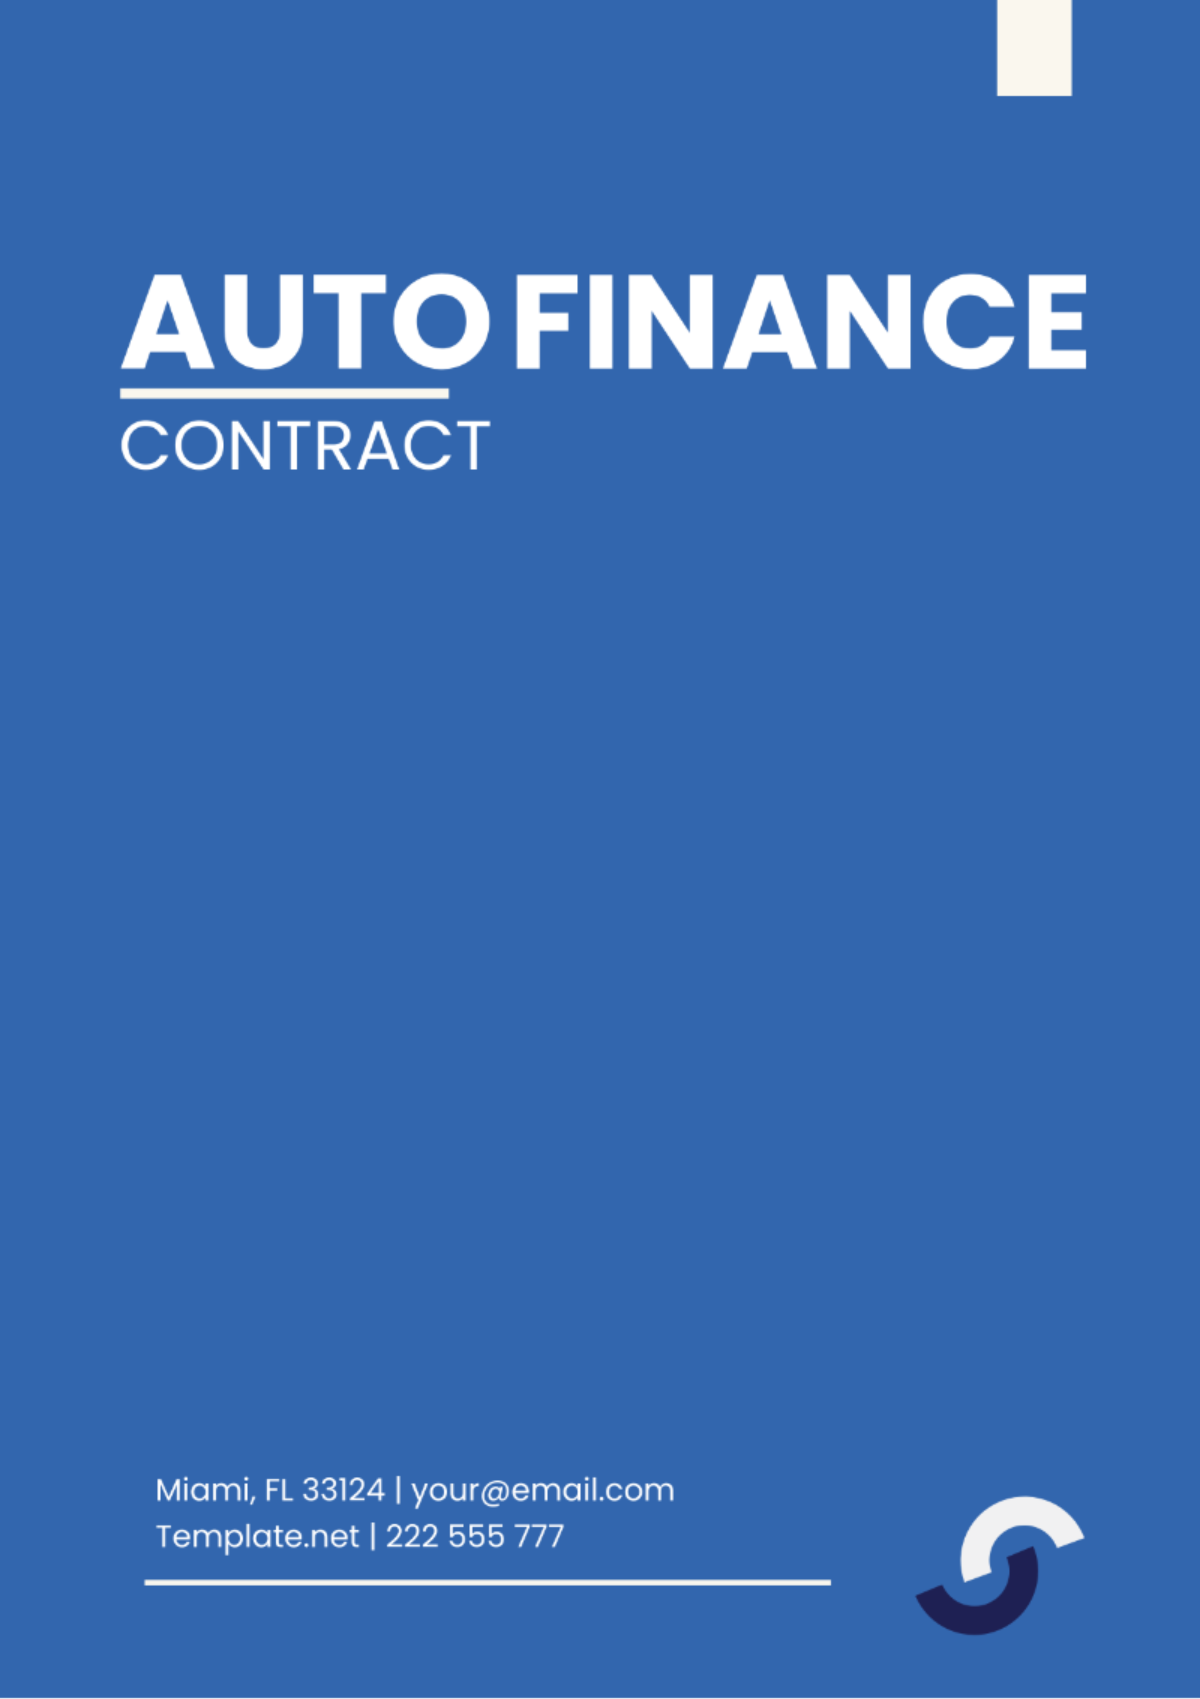 Auto Finance Contract Template